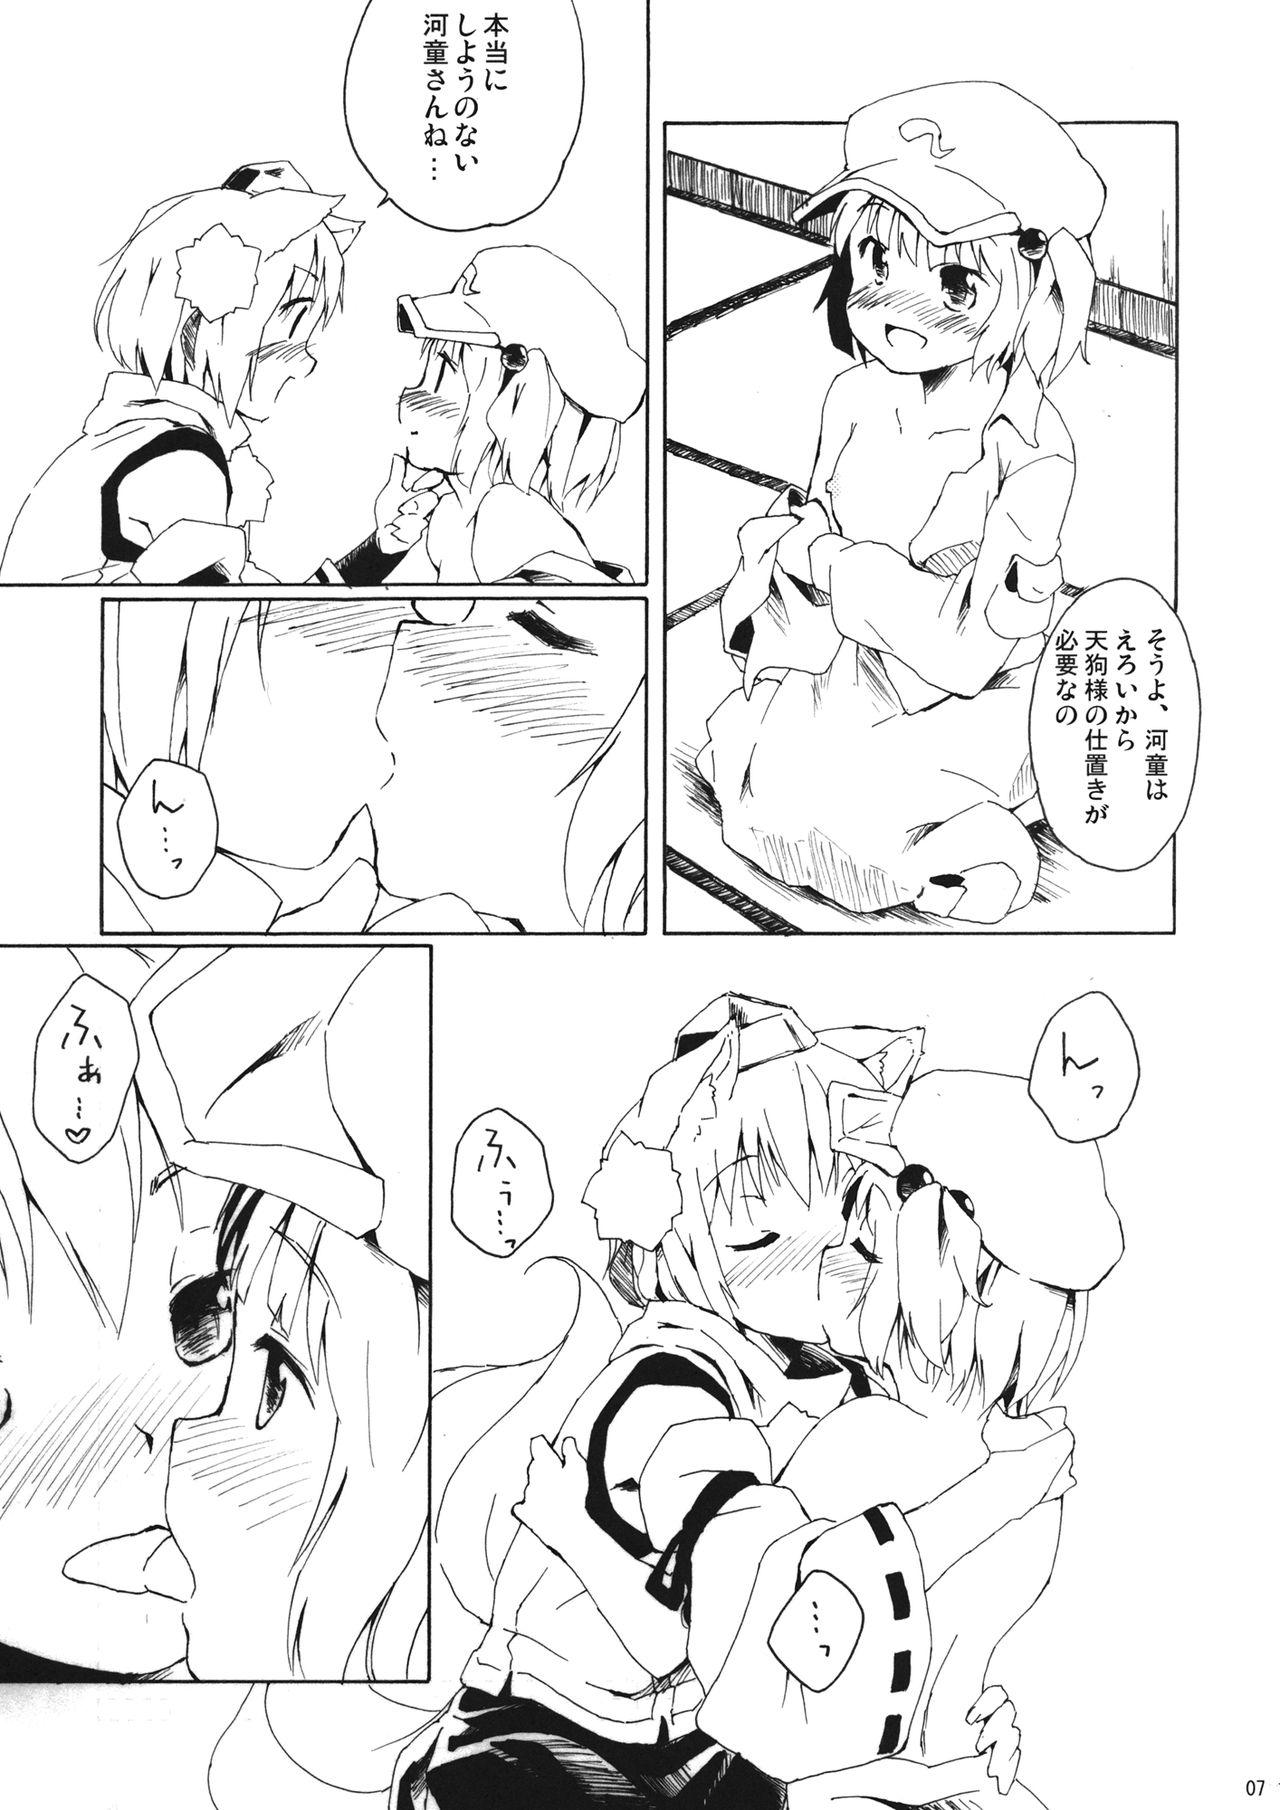 Softcore Oh, Commie and Copper - Touhou project Bdsm - Page 6